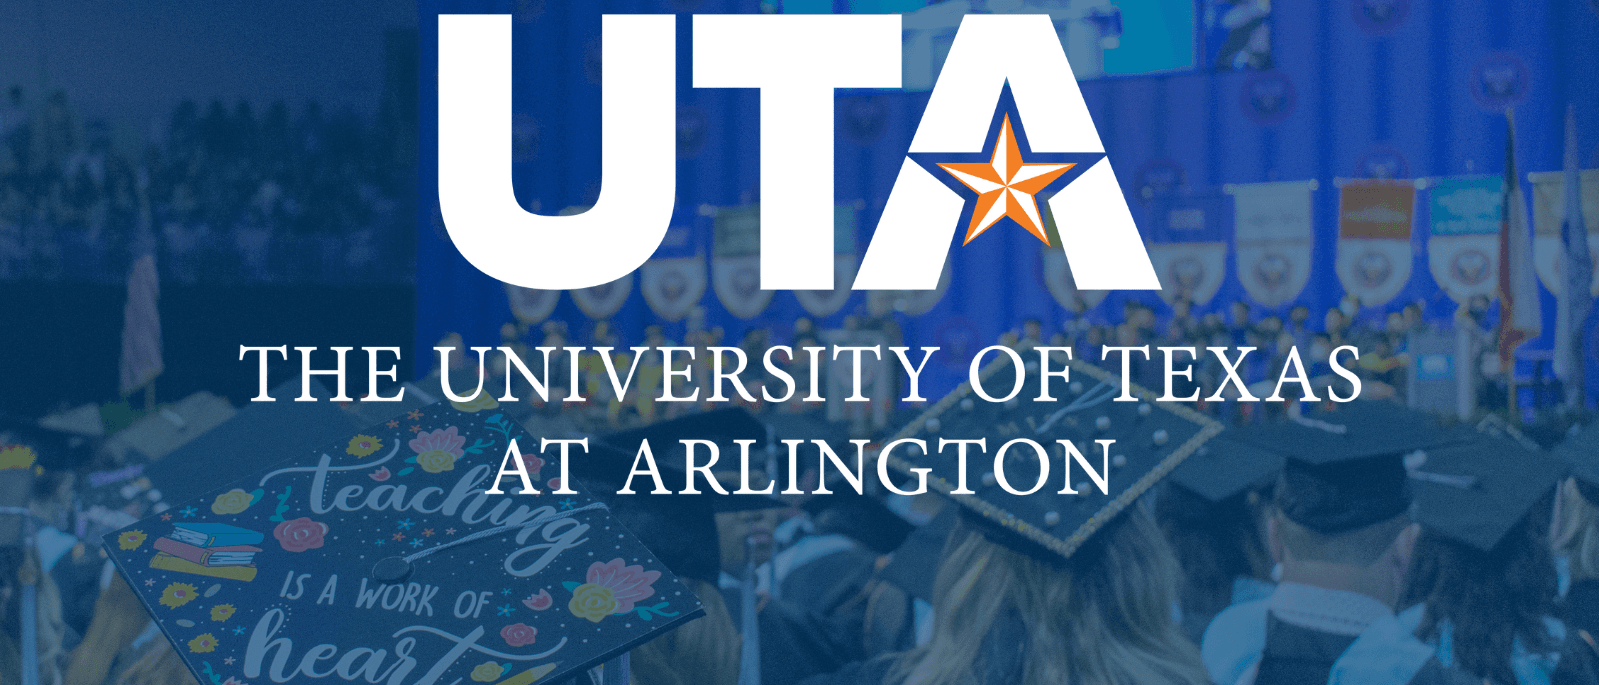 "UTA" appears in the center of image in white font. "THE UNIVERSITY OF TEXAS AT ARLINGTON" appears in smaller font size underneath. Faded background of a commencement ceremony. 